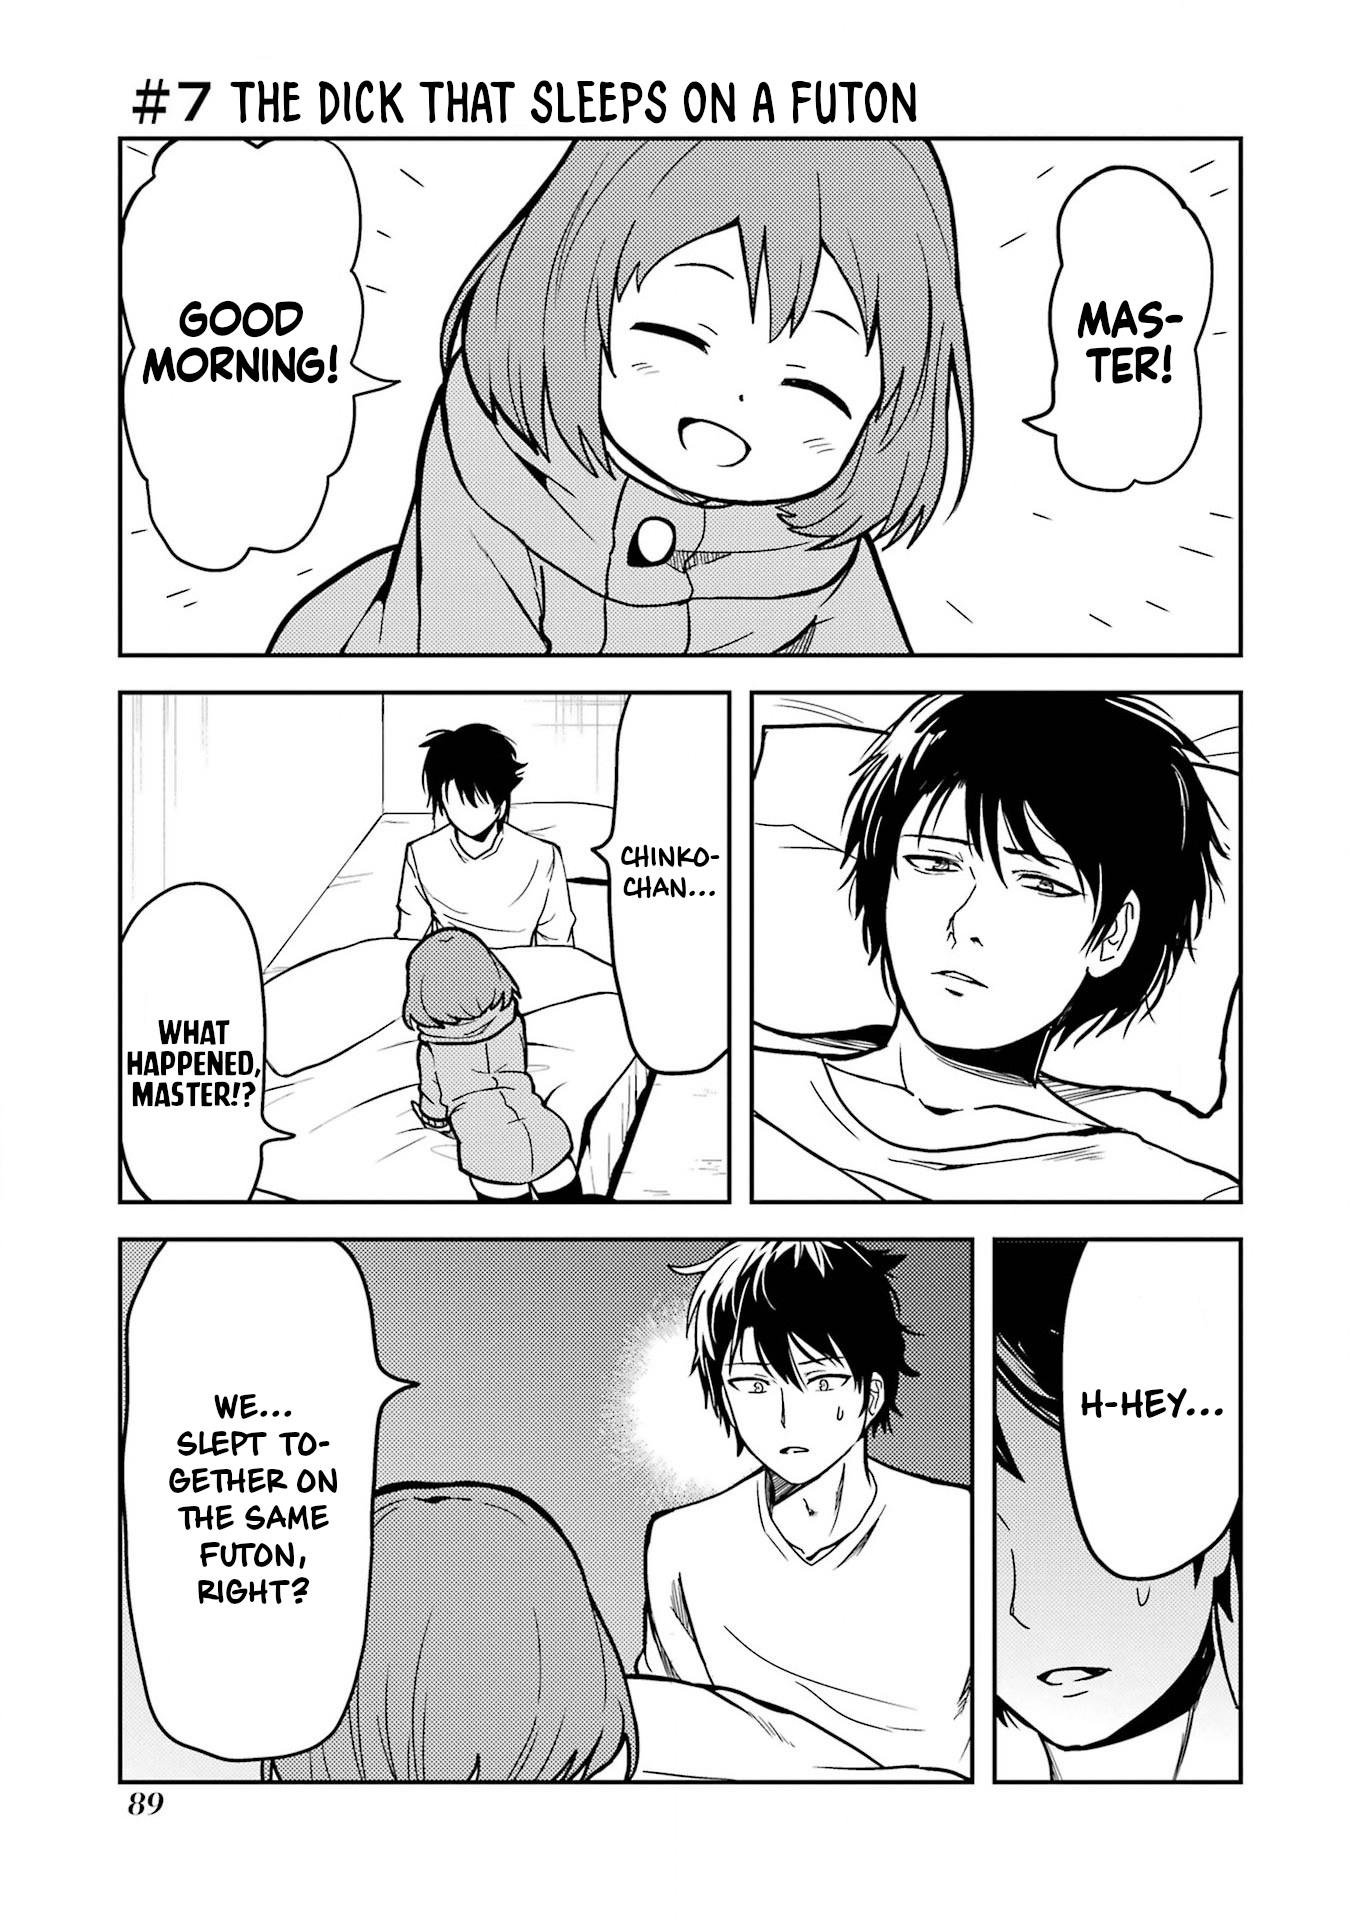 Turns Out My Dick Was A Cute Girl Vol.1 Chapter 7: The Dick That Sleeps On A Futon - Picture 1